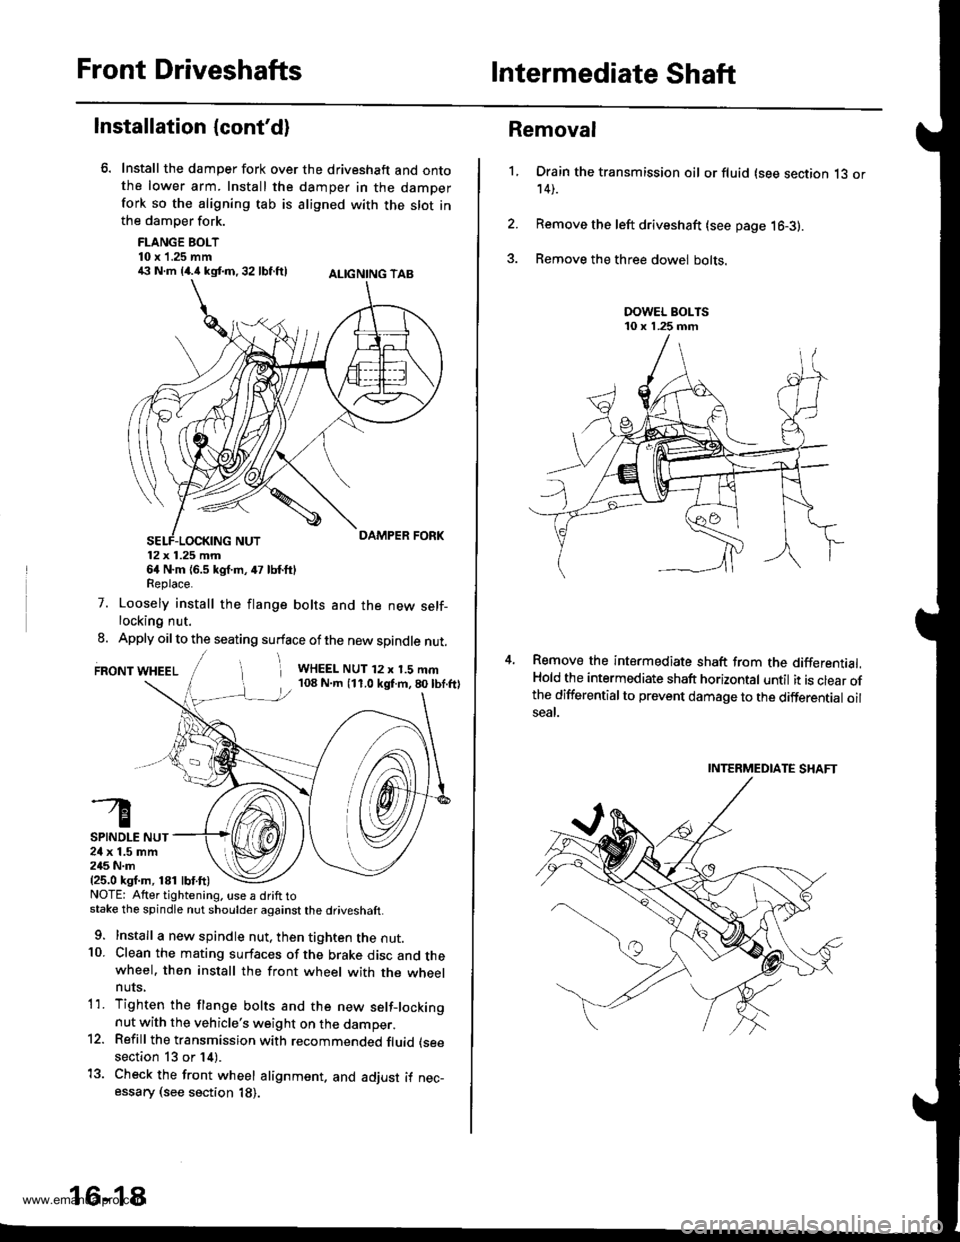 HONDA CR-V 1999 RD1-RD3 / 1.G Workshop Manual 
Front DriveshaftsIntermediate Shaft
Installation {contd}
Install the damper fork over the driveshaft and ontothe lower arm. Install the damper in the damperfork so the aligning tab is aligned with t